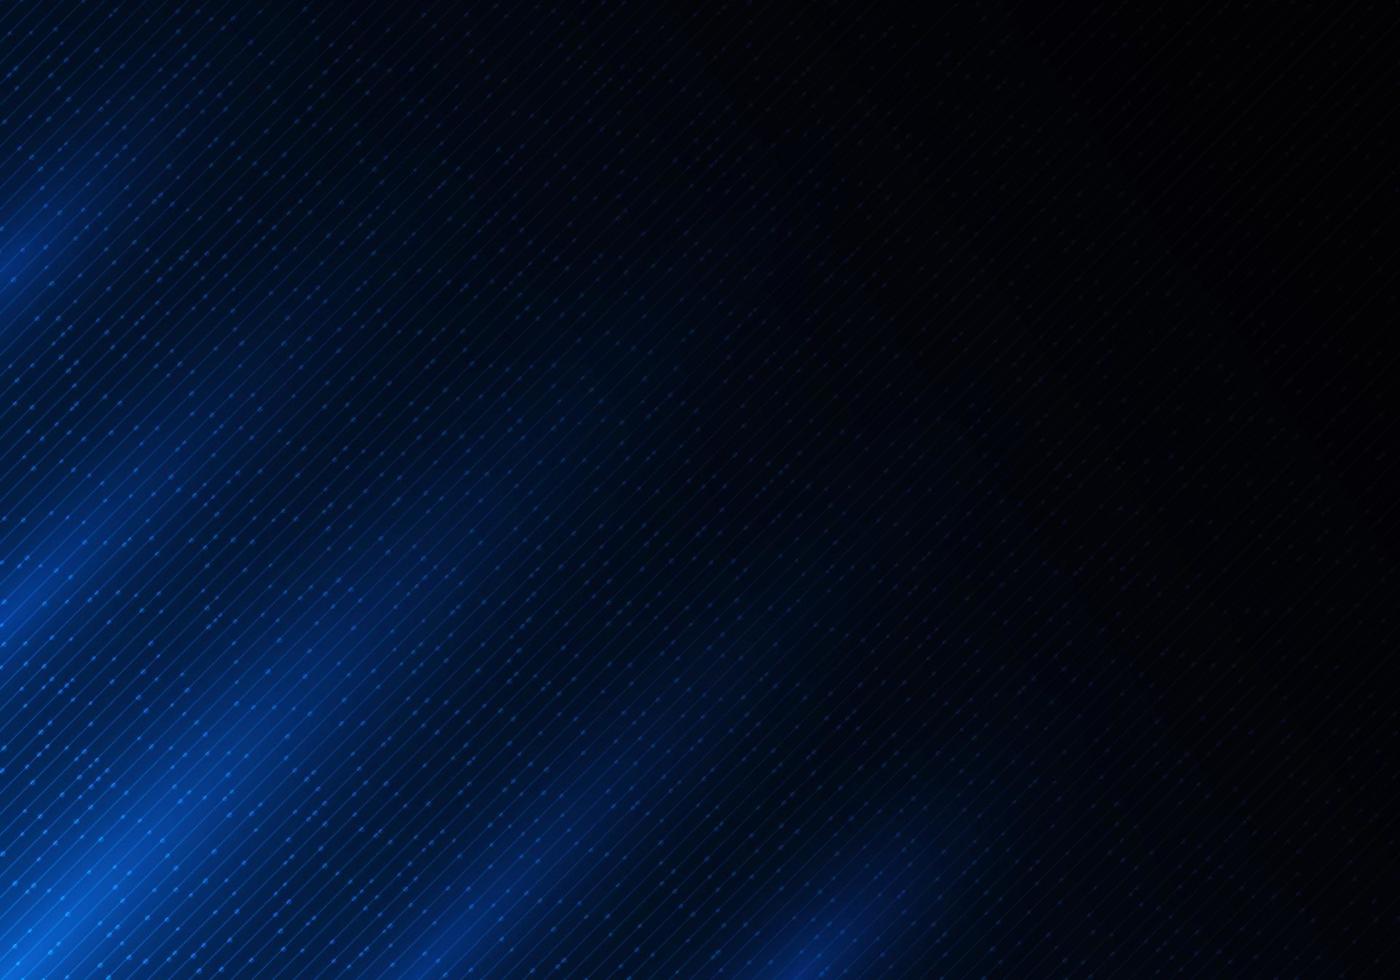 Abstract blue shiny diagonal lines and dot particles with lighting on dark blue background vector